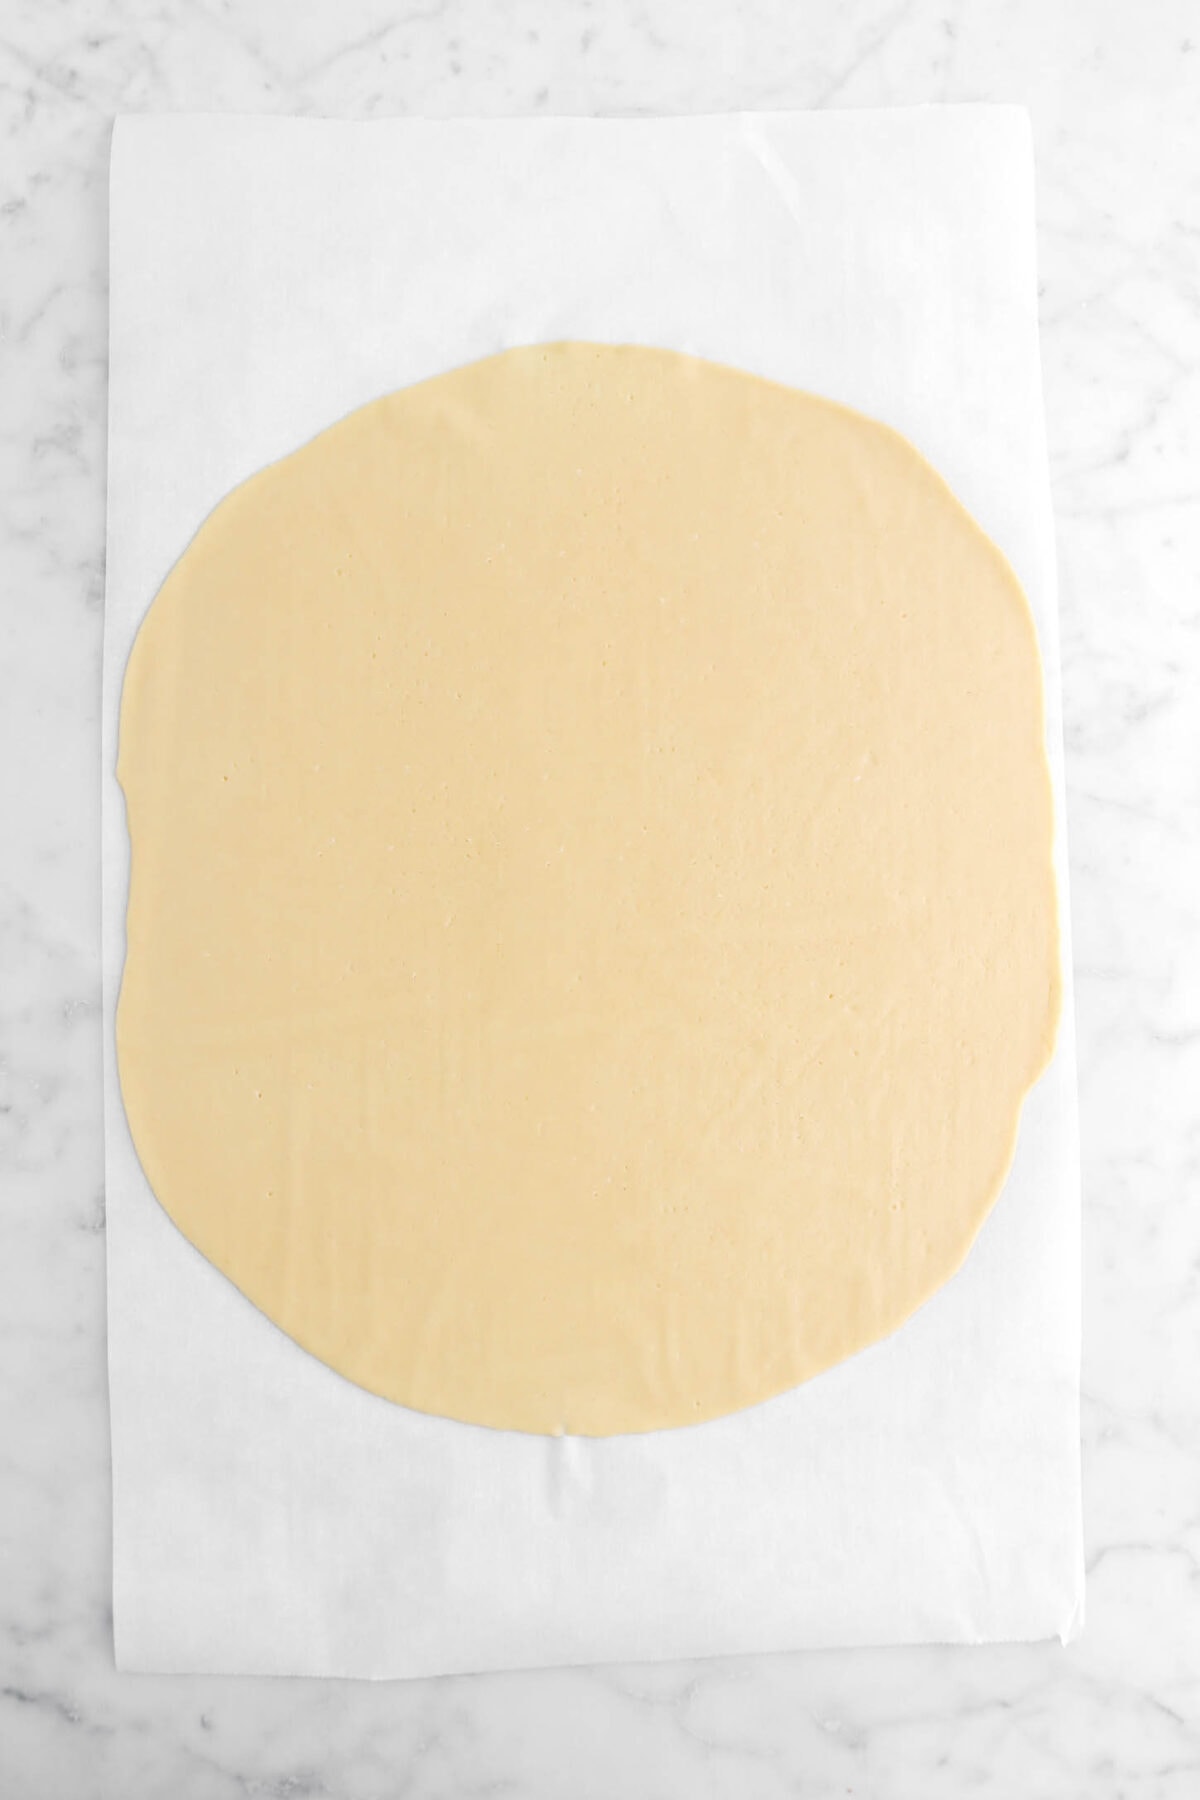 tart dough rolled out on parchment paper.